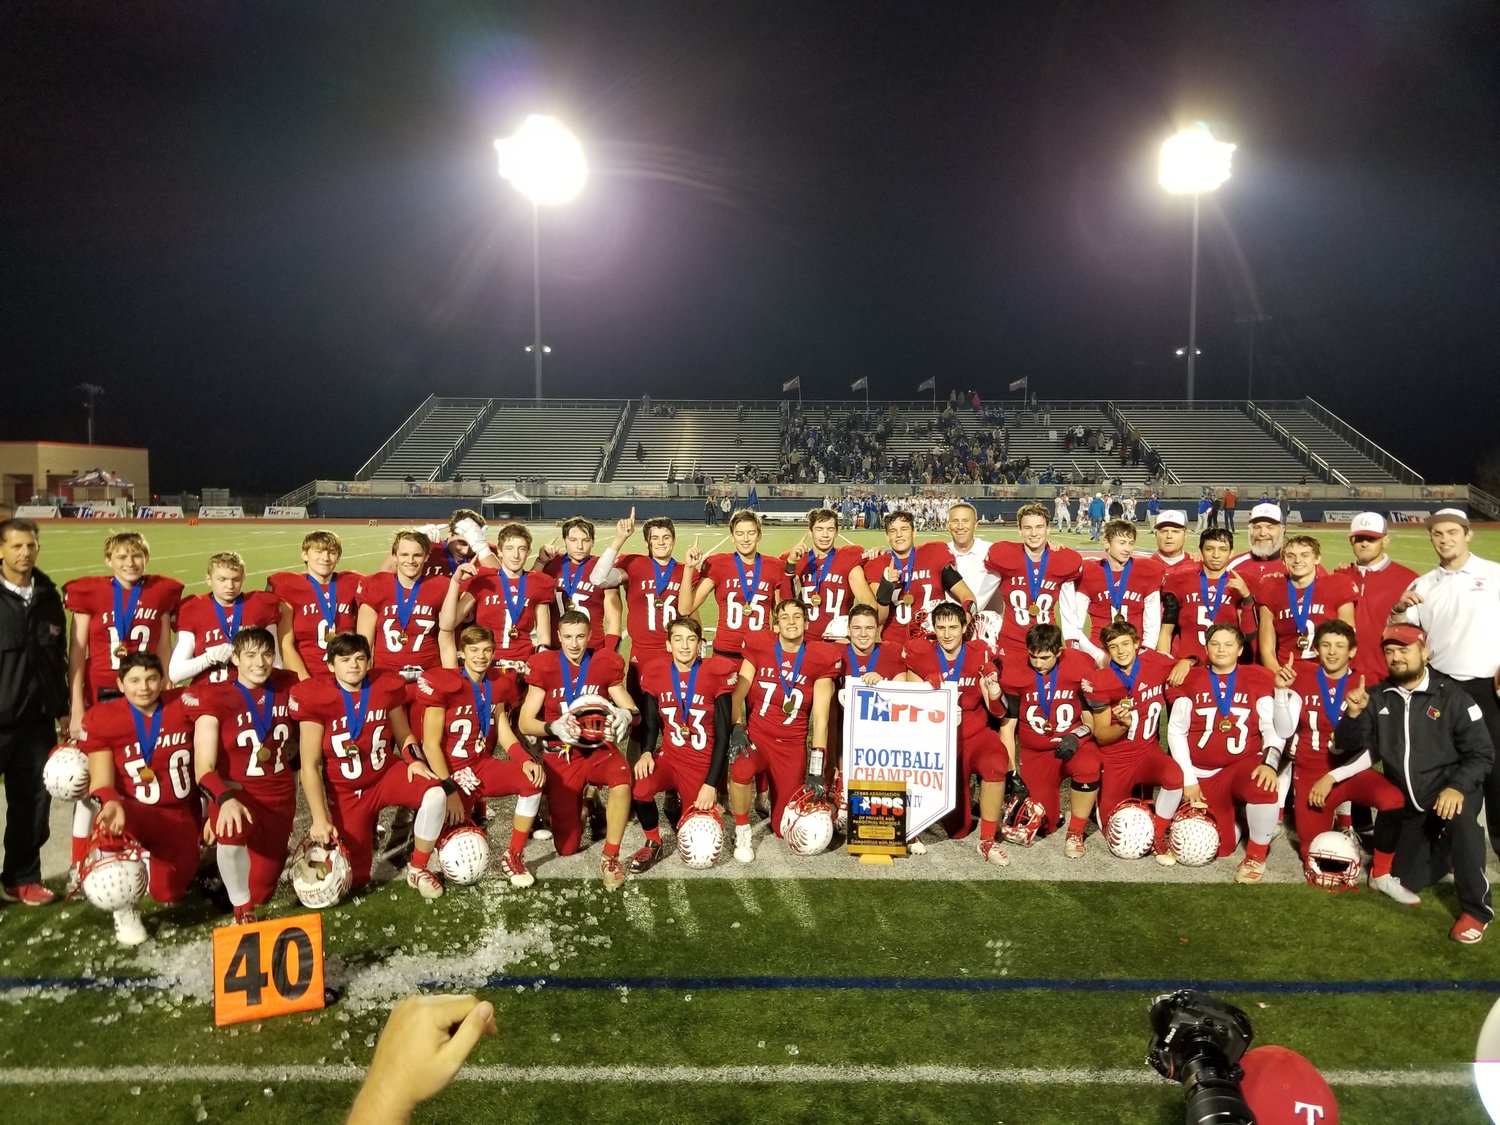 Shiner St Paul knocked off their rivals Hallettsville Sacred Heart 20-16 to capture their fourth title in five years, their eighth in school history.